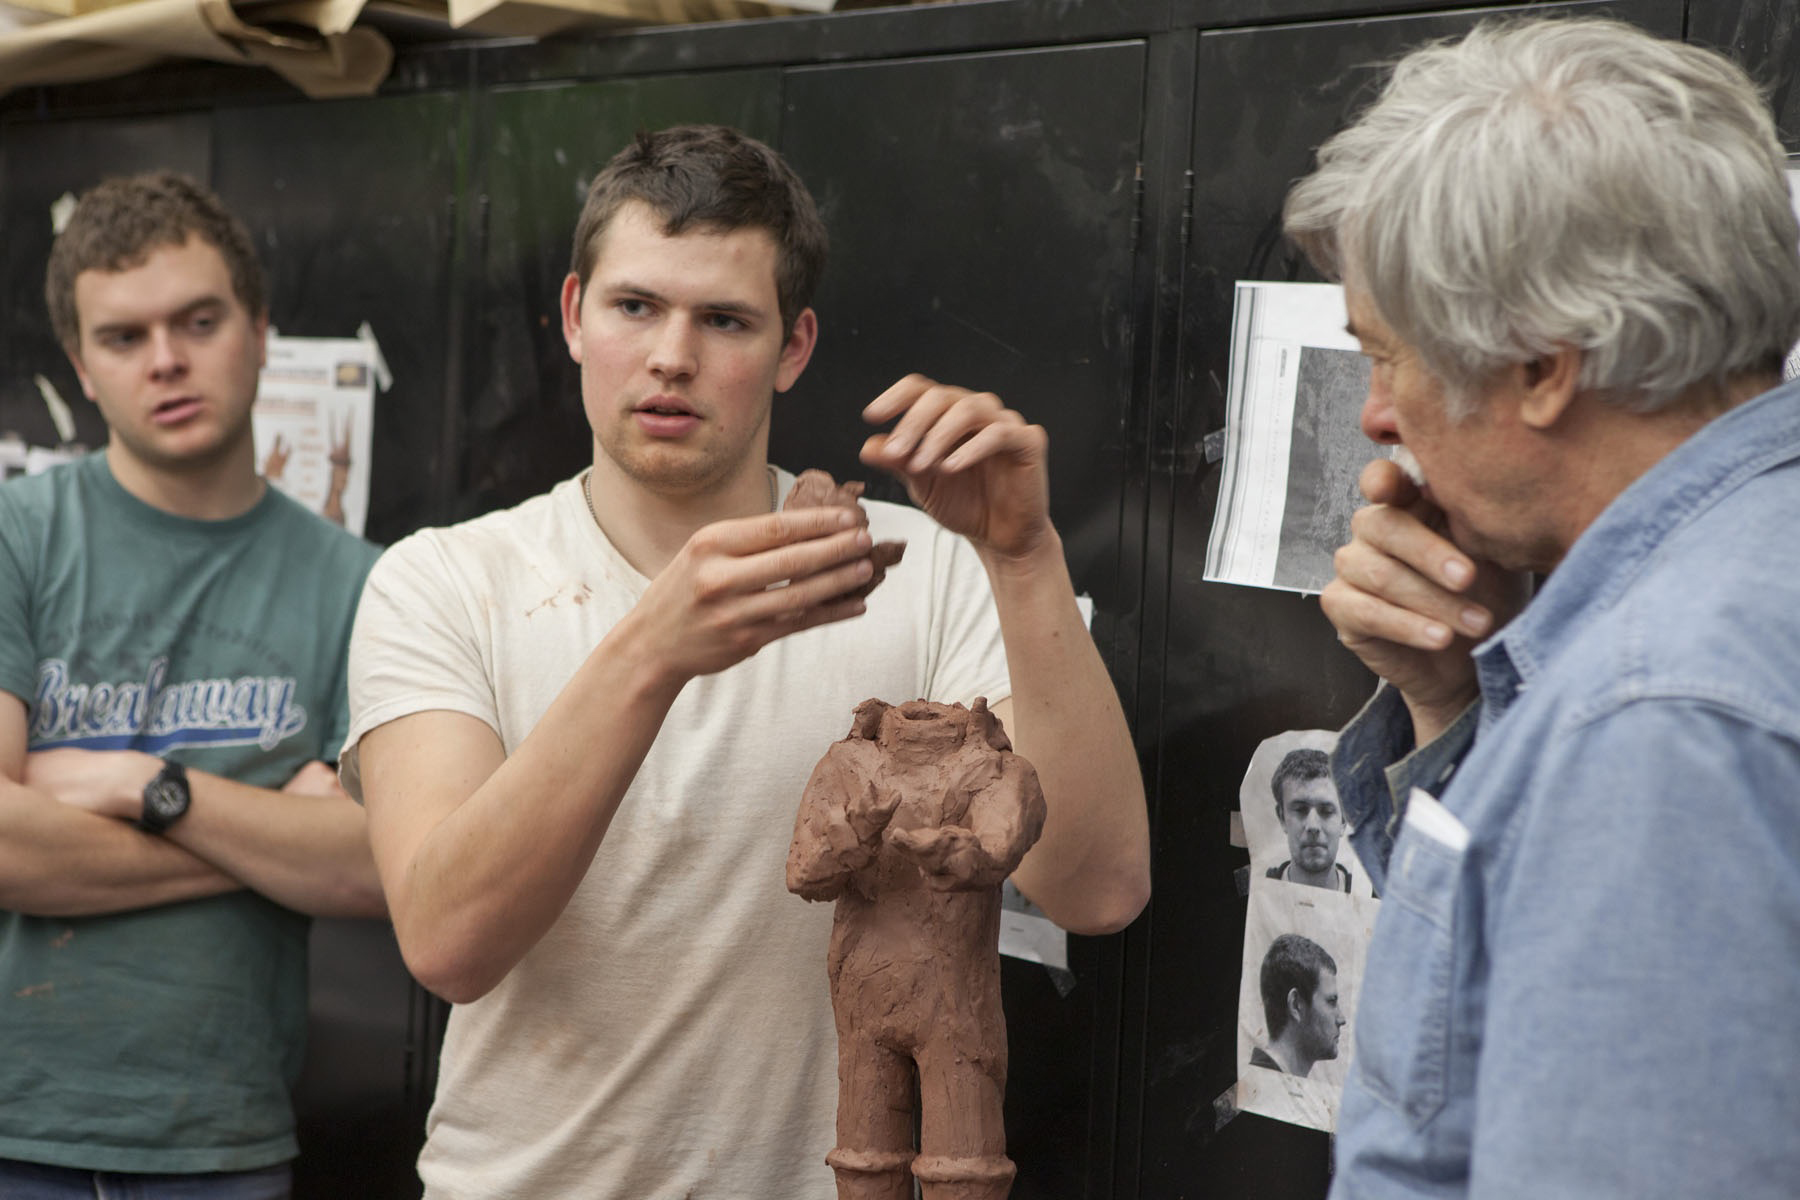 William Bennett, right, listens to a student who is holding the head of a clay figure